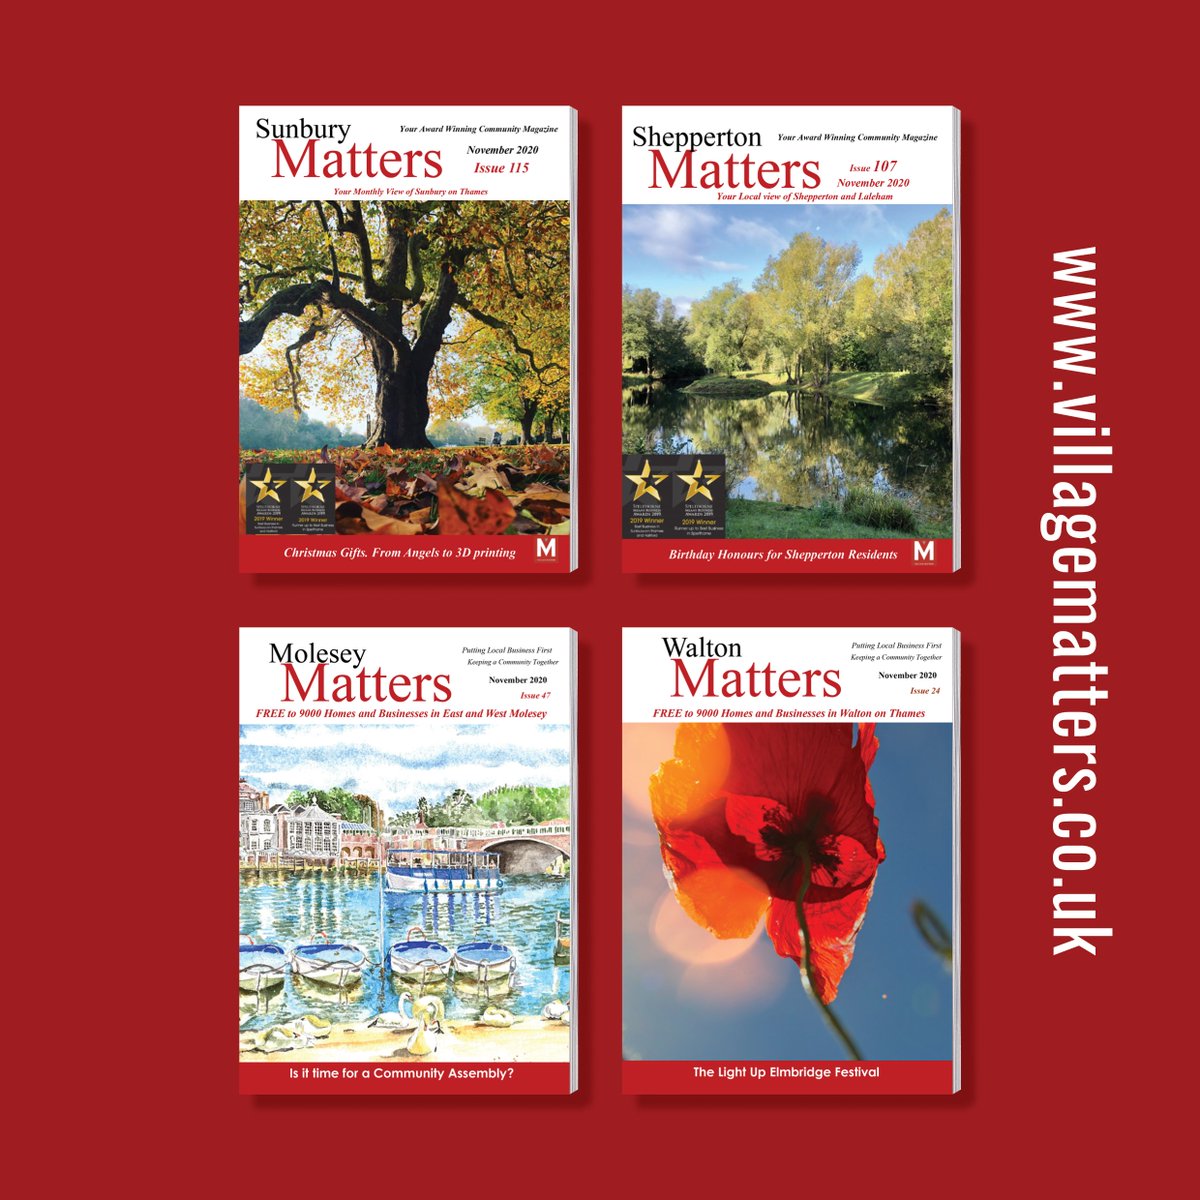 The November 2020 Issues of Molesey and Walton Matters are out now! Check them out in print, or in digital on our website for all your latest community info! -- Village Matters publications available in print, or online at villagematters.co.uk